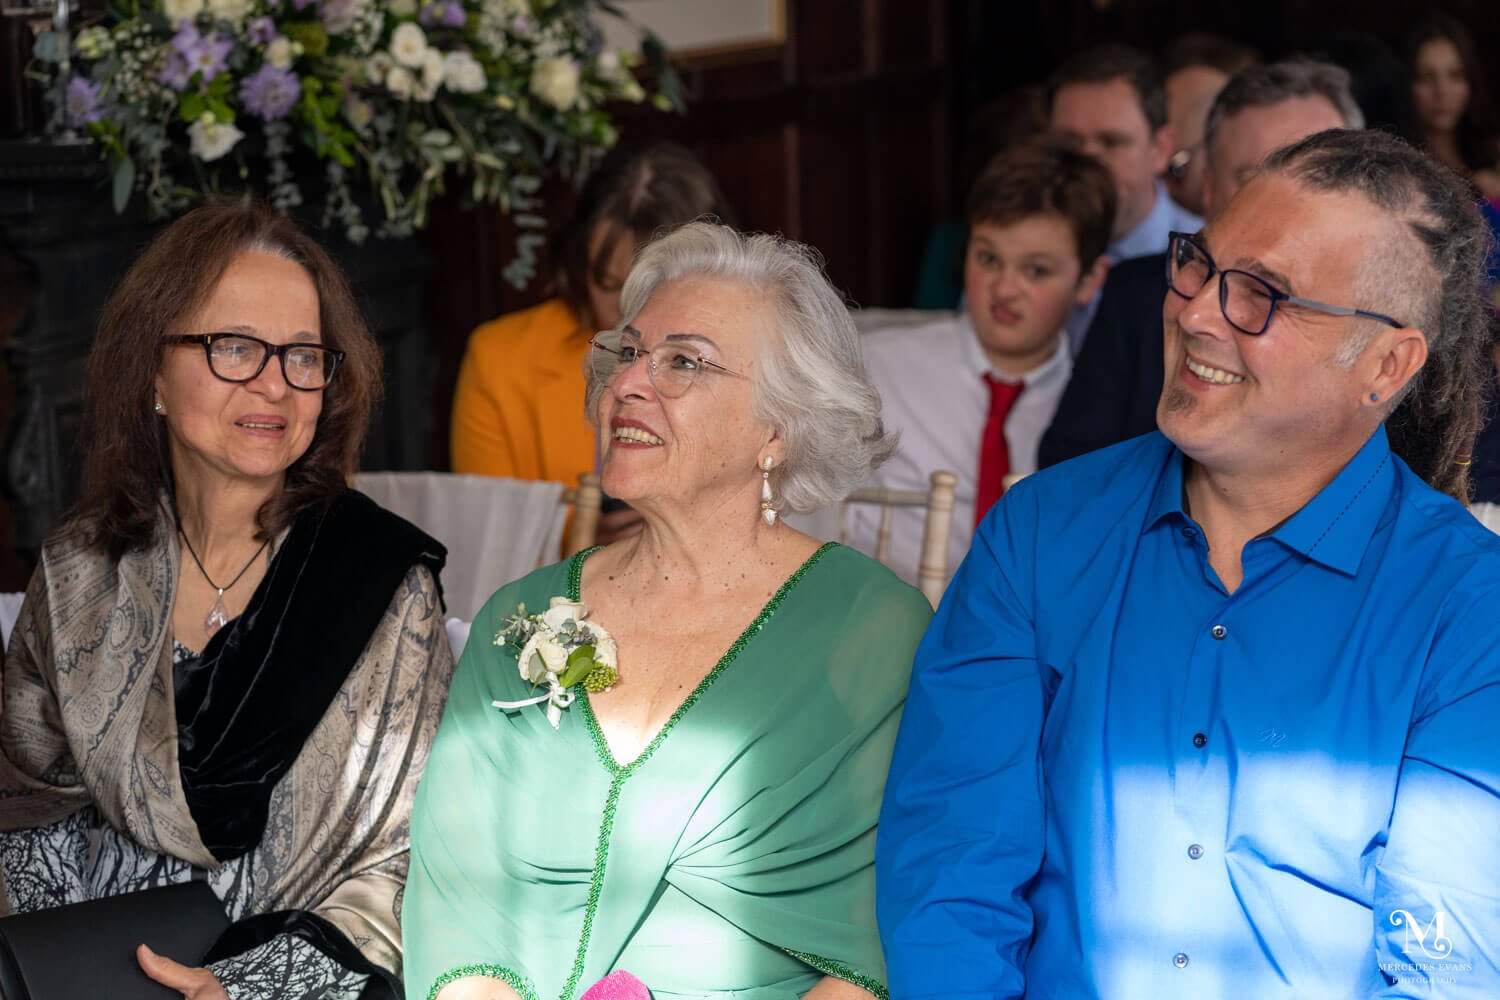 wedding guests smile during the ceremony